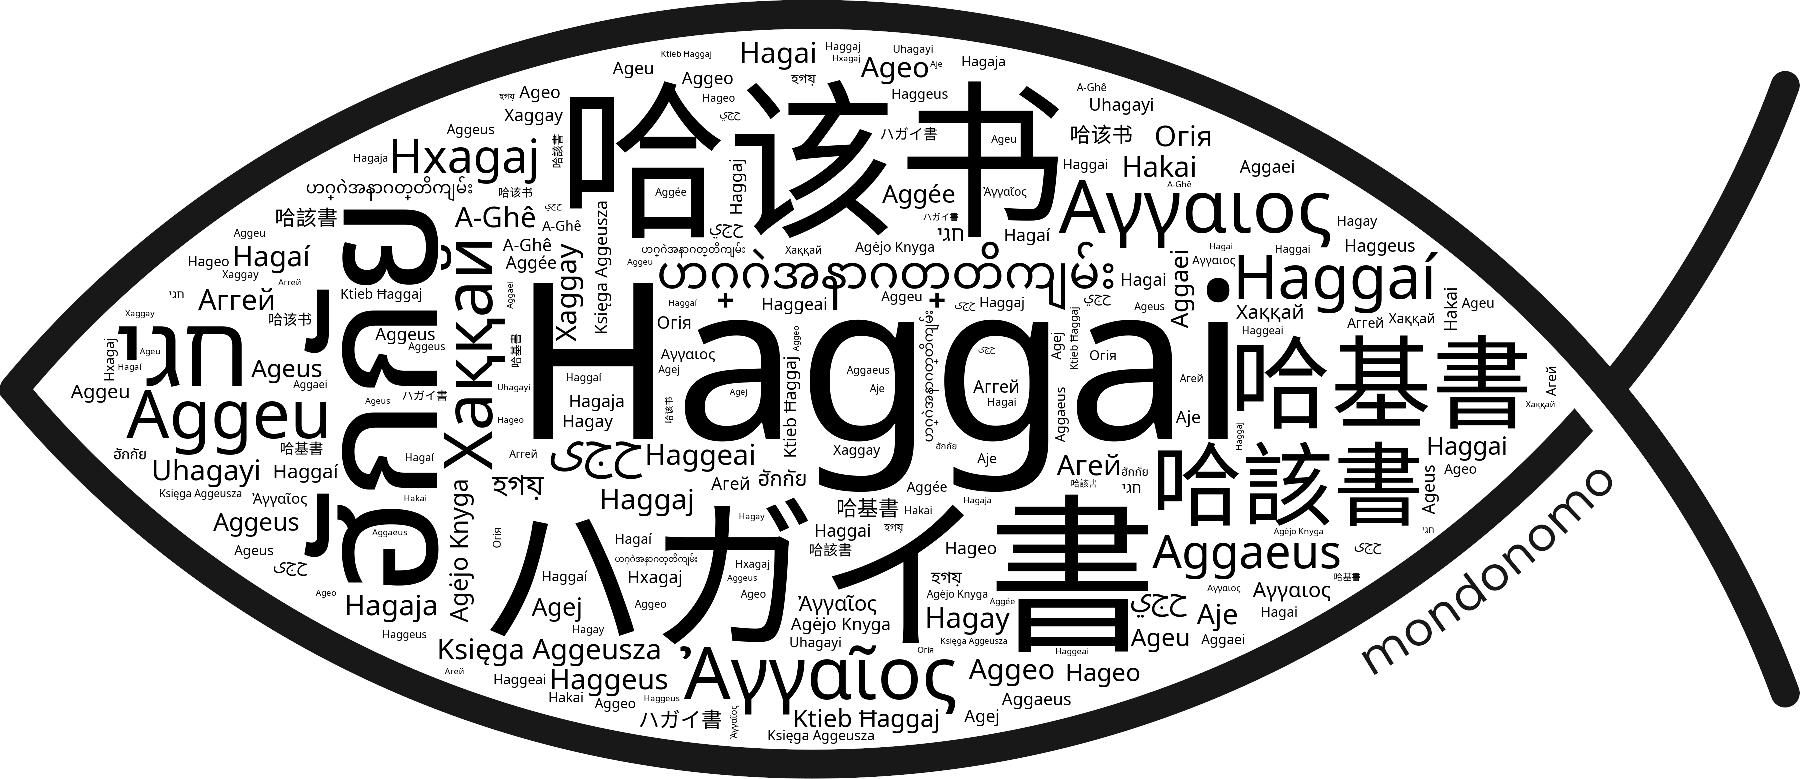 Name Haggai in the world's Bibles